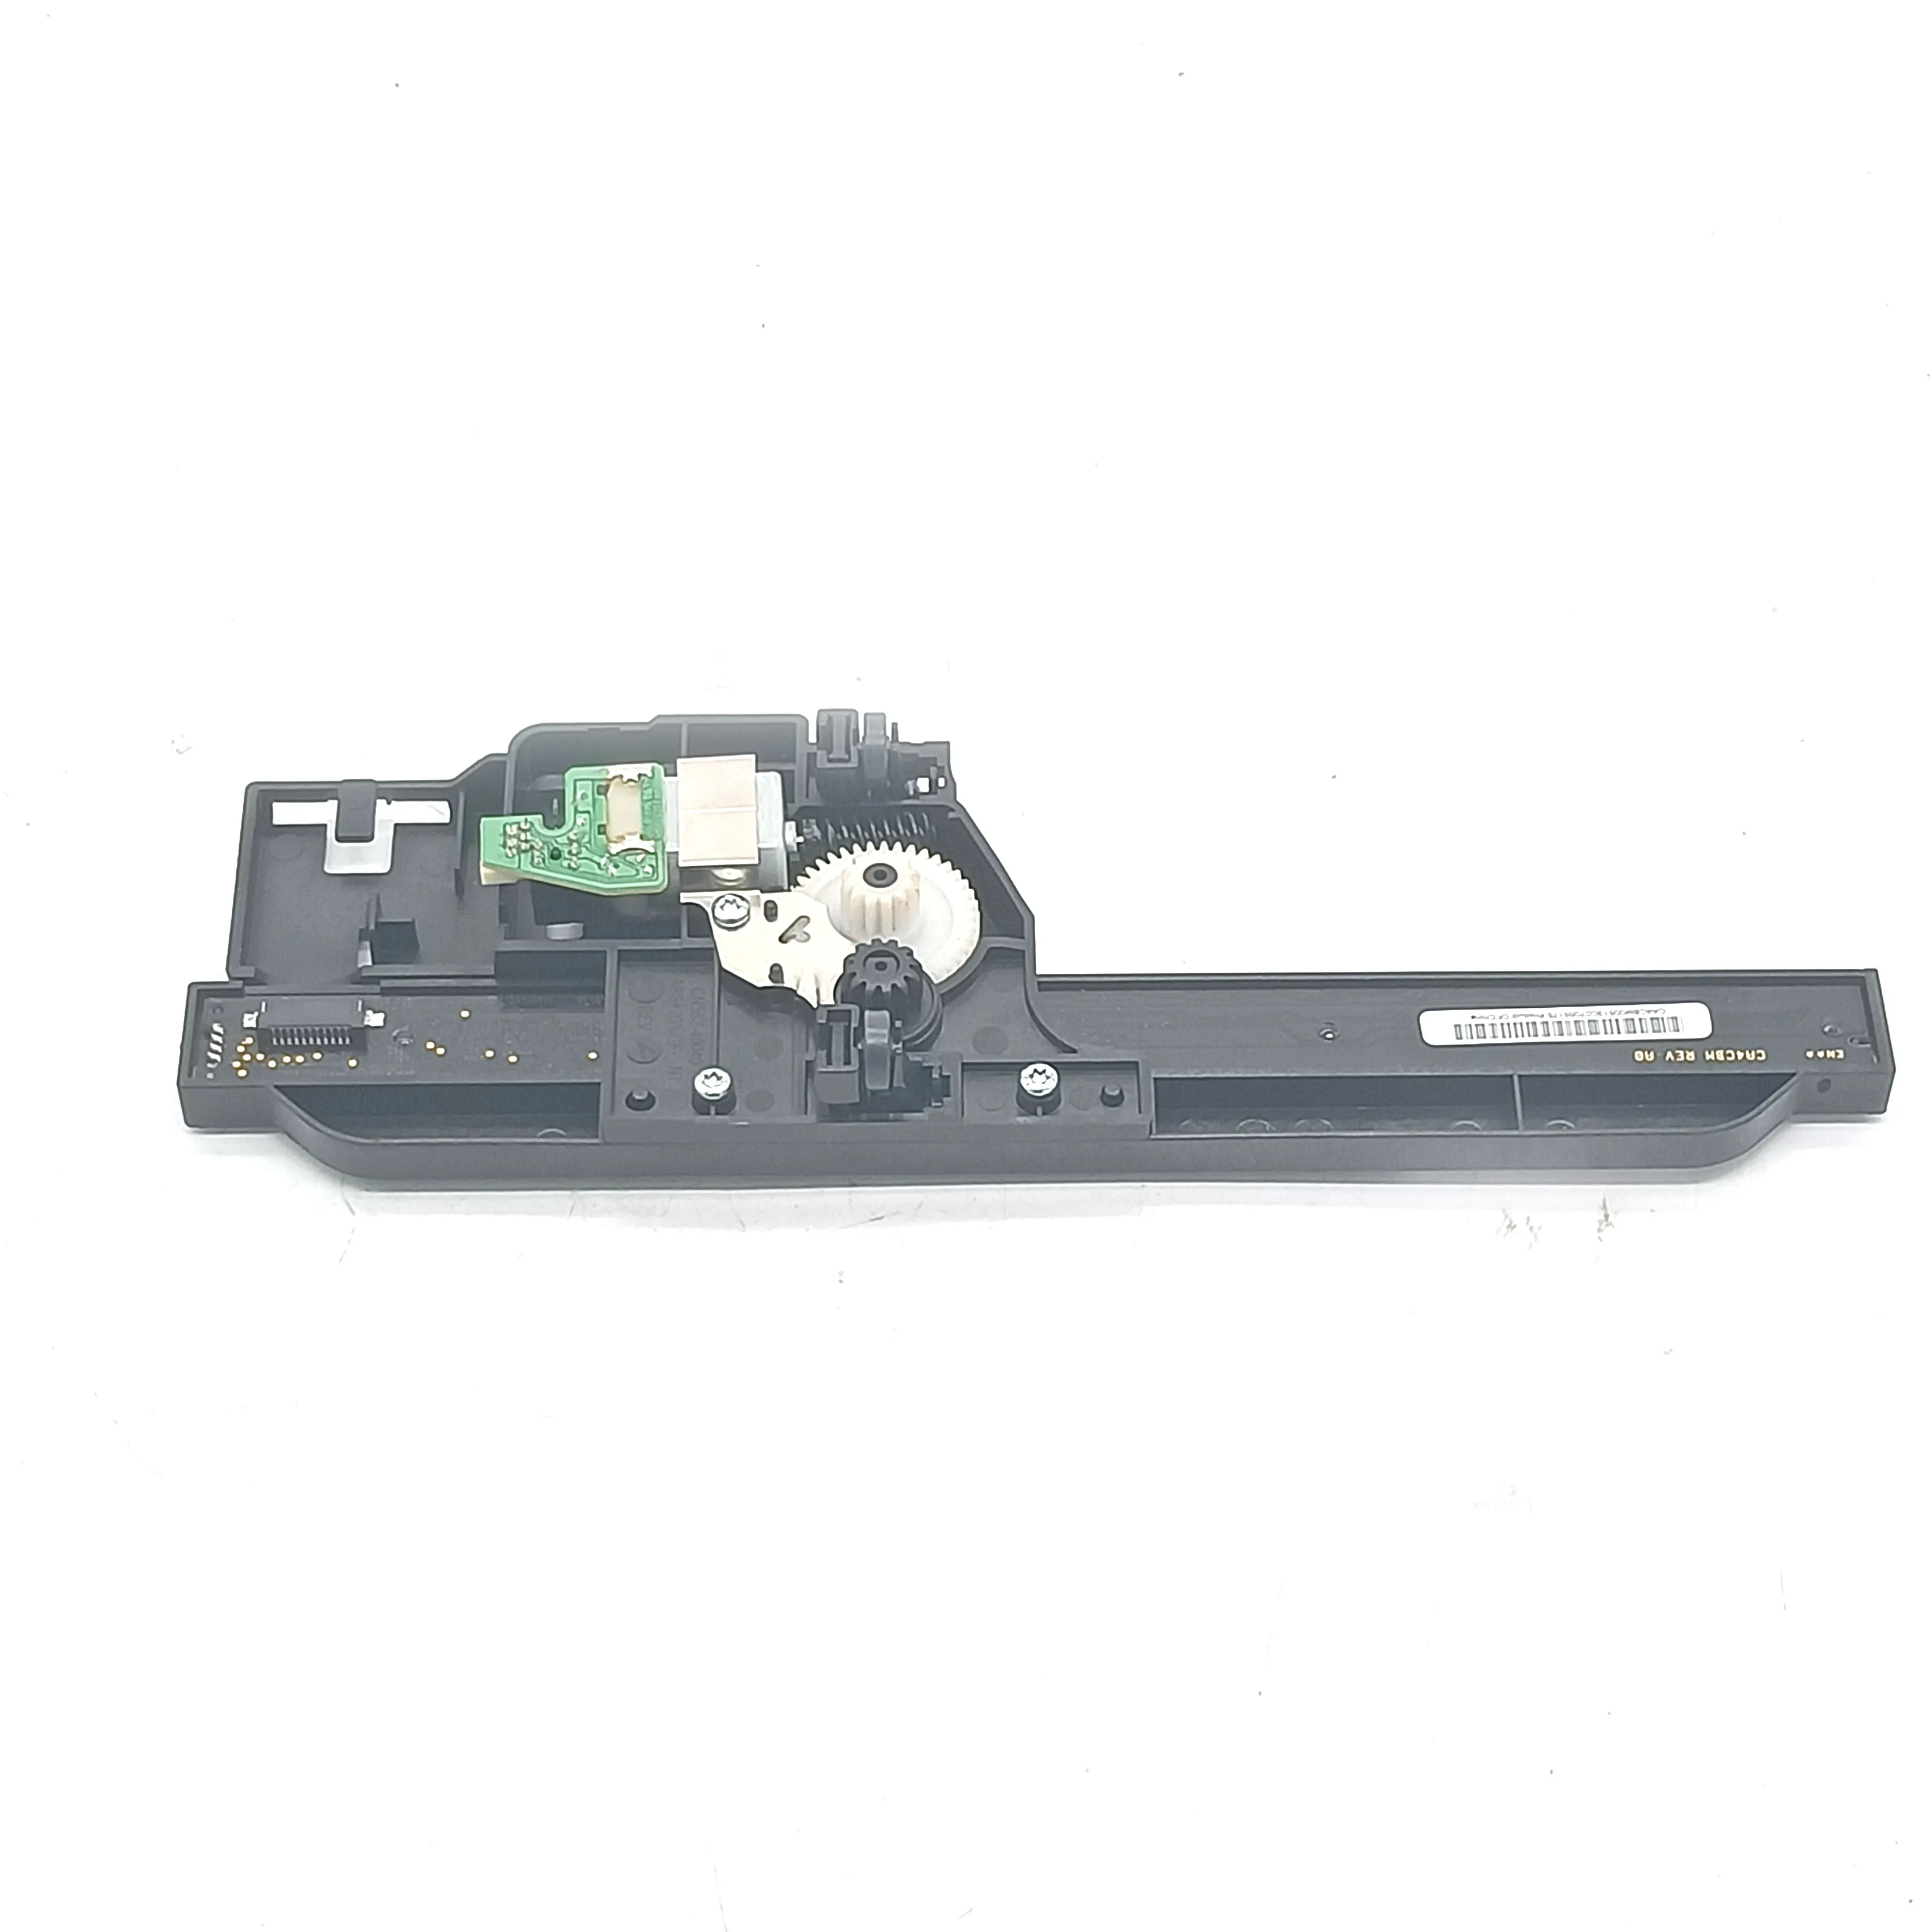 

Scanner Head 4610 Fits For HP 3070 4615 4620 3520 5524 3524 5510 5520 3525 3521 5514 4610 3070A 3522 5525 5522 5512 4625